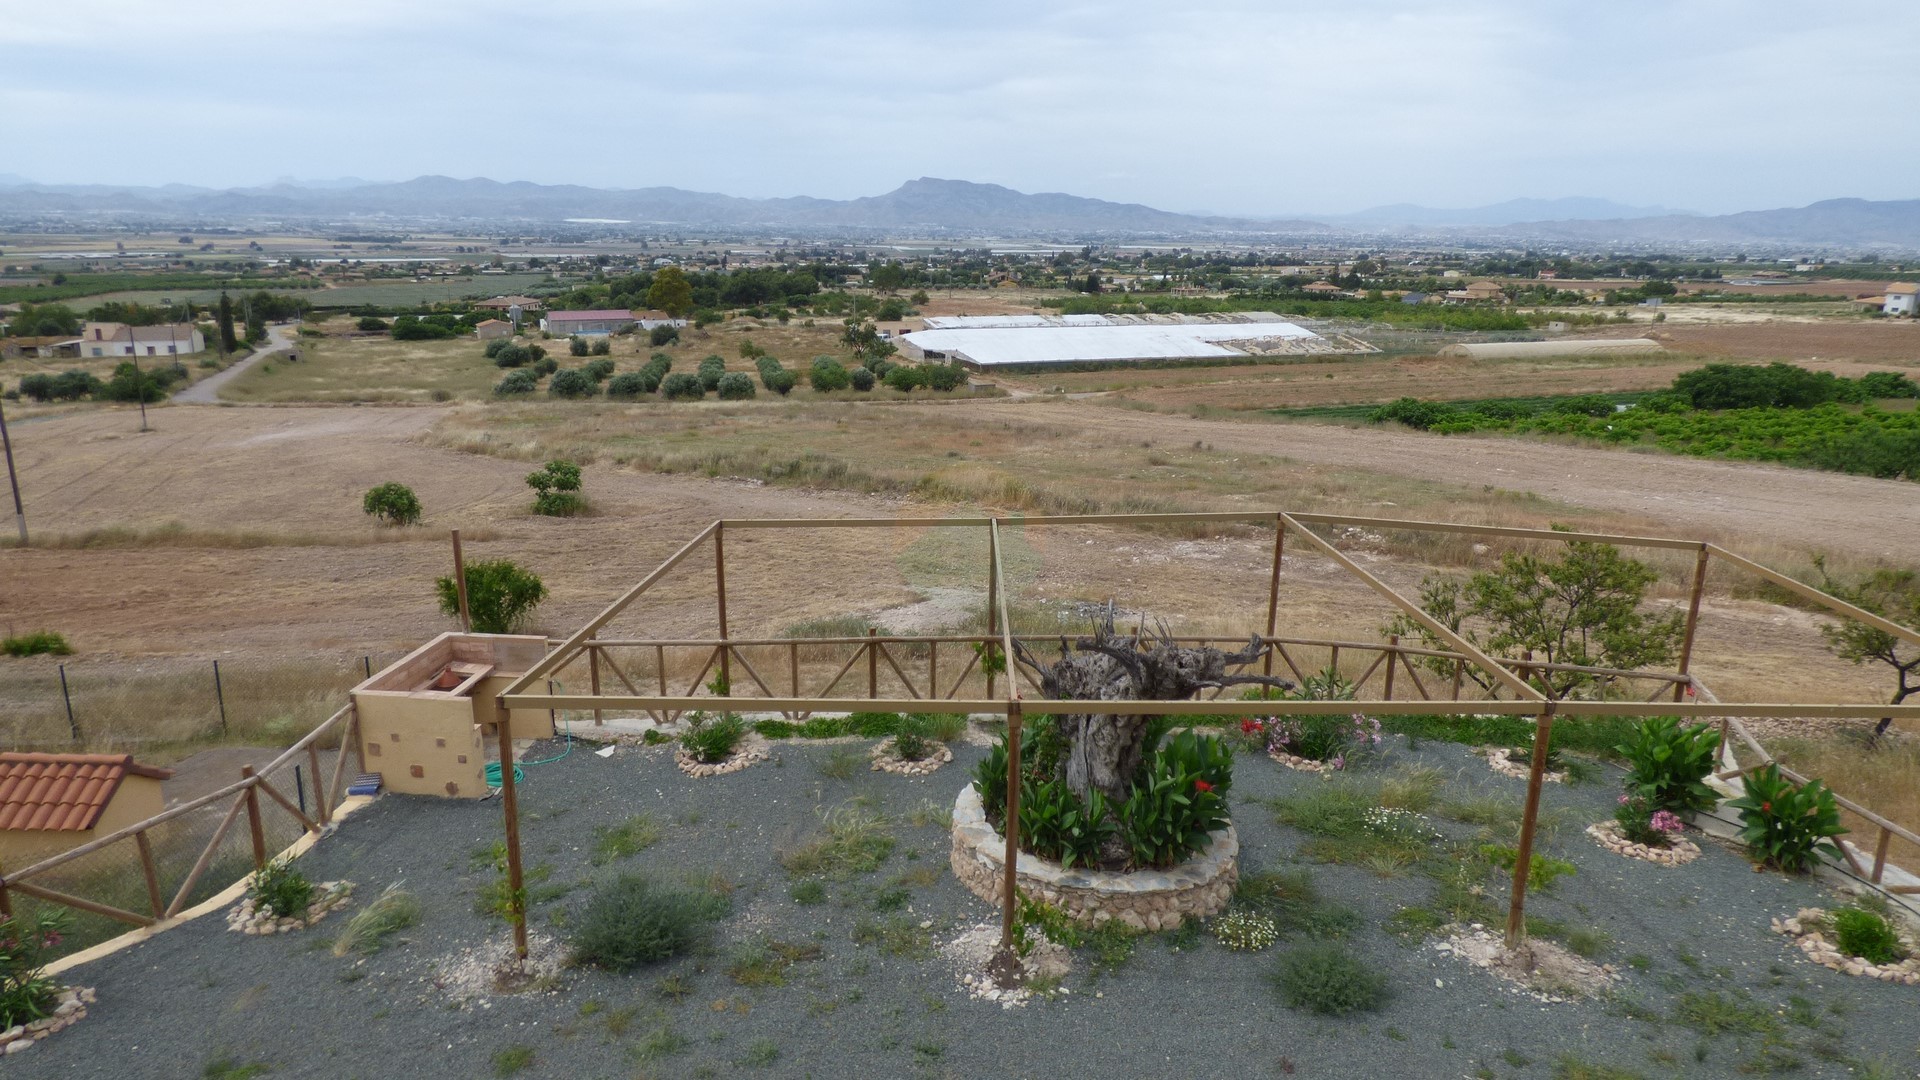 9 Bedroom Country house For Sale - Lorca